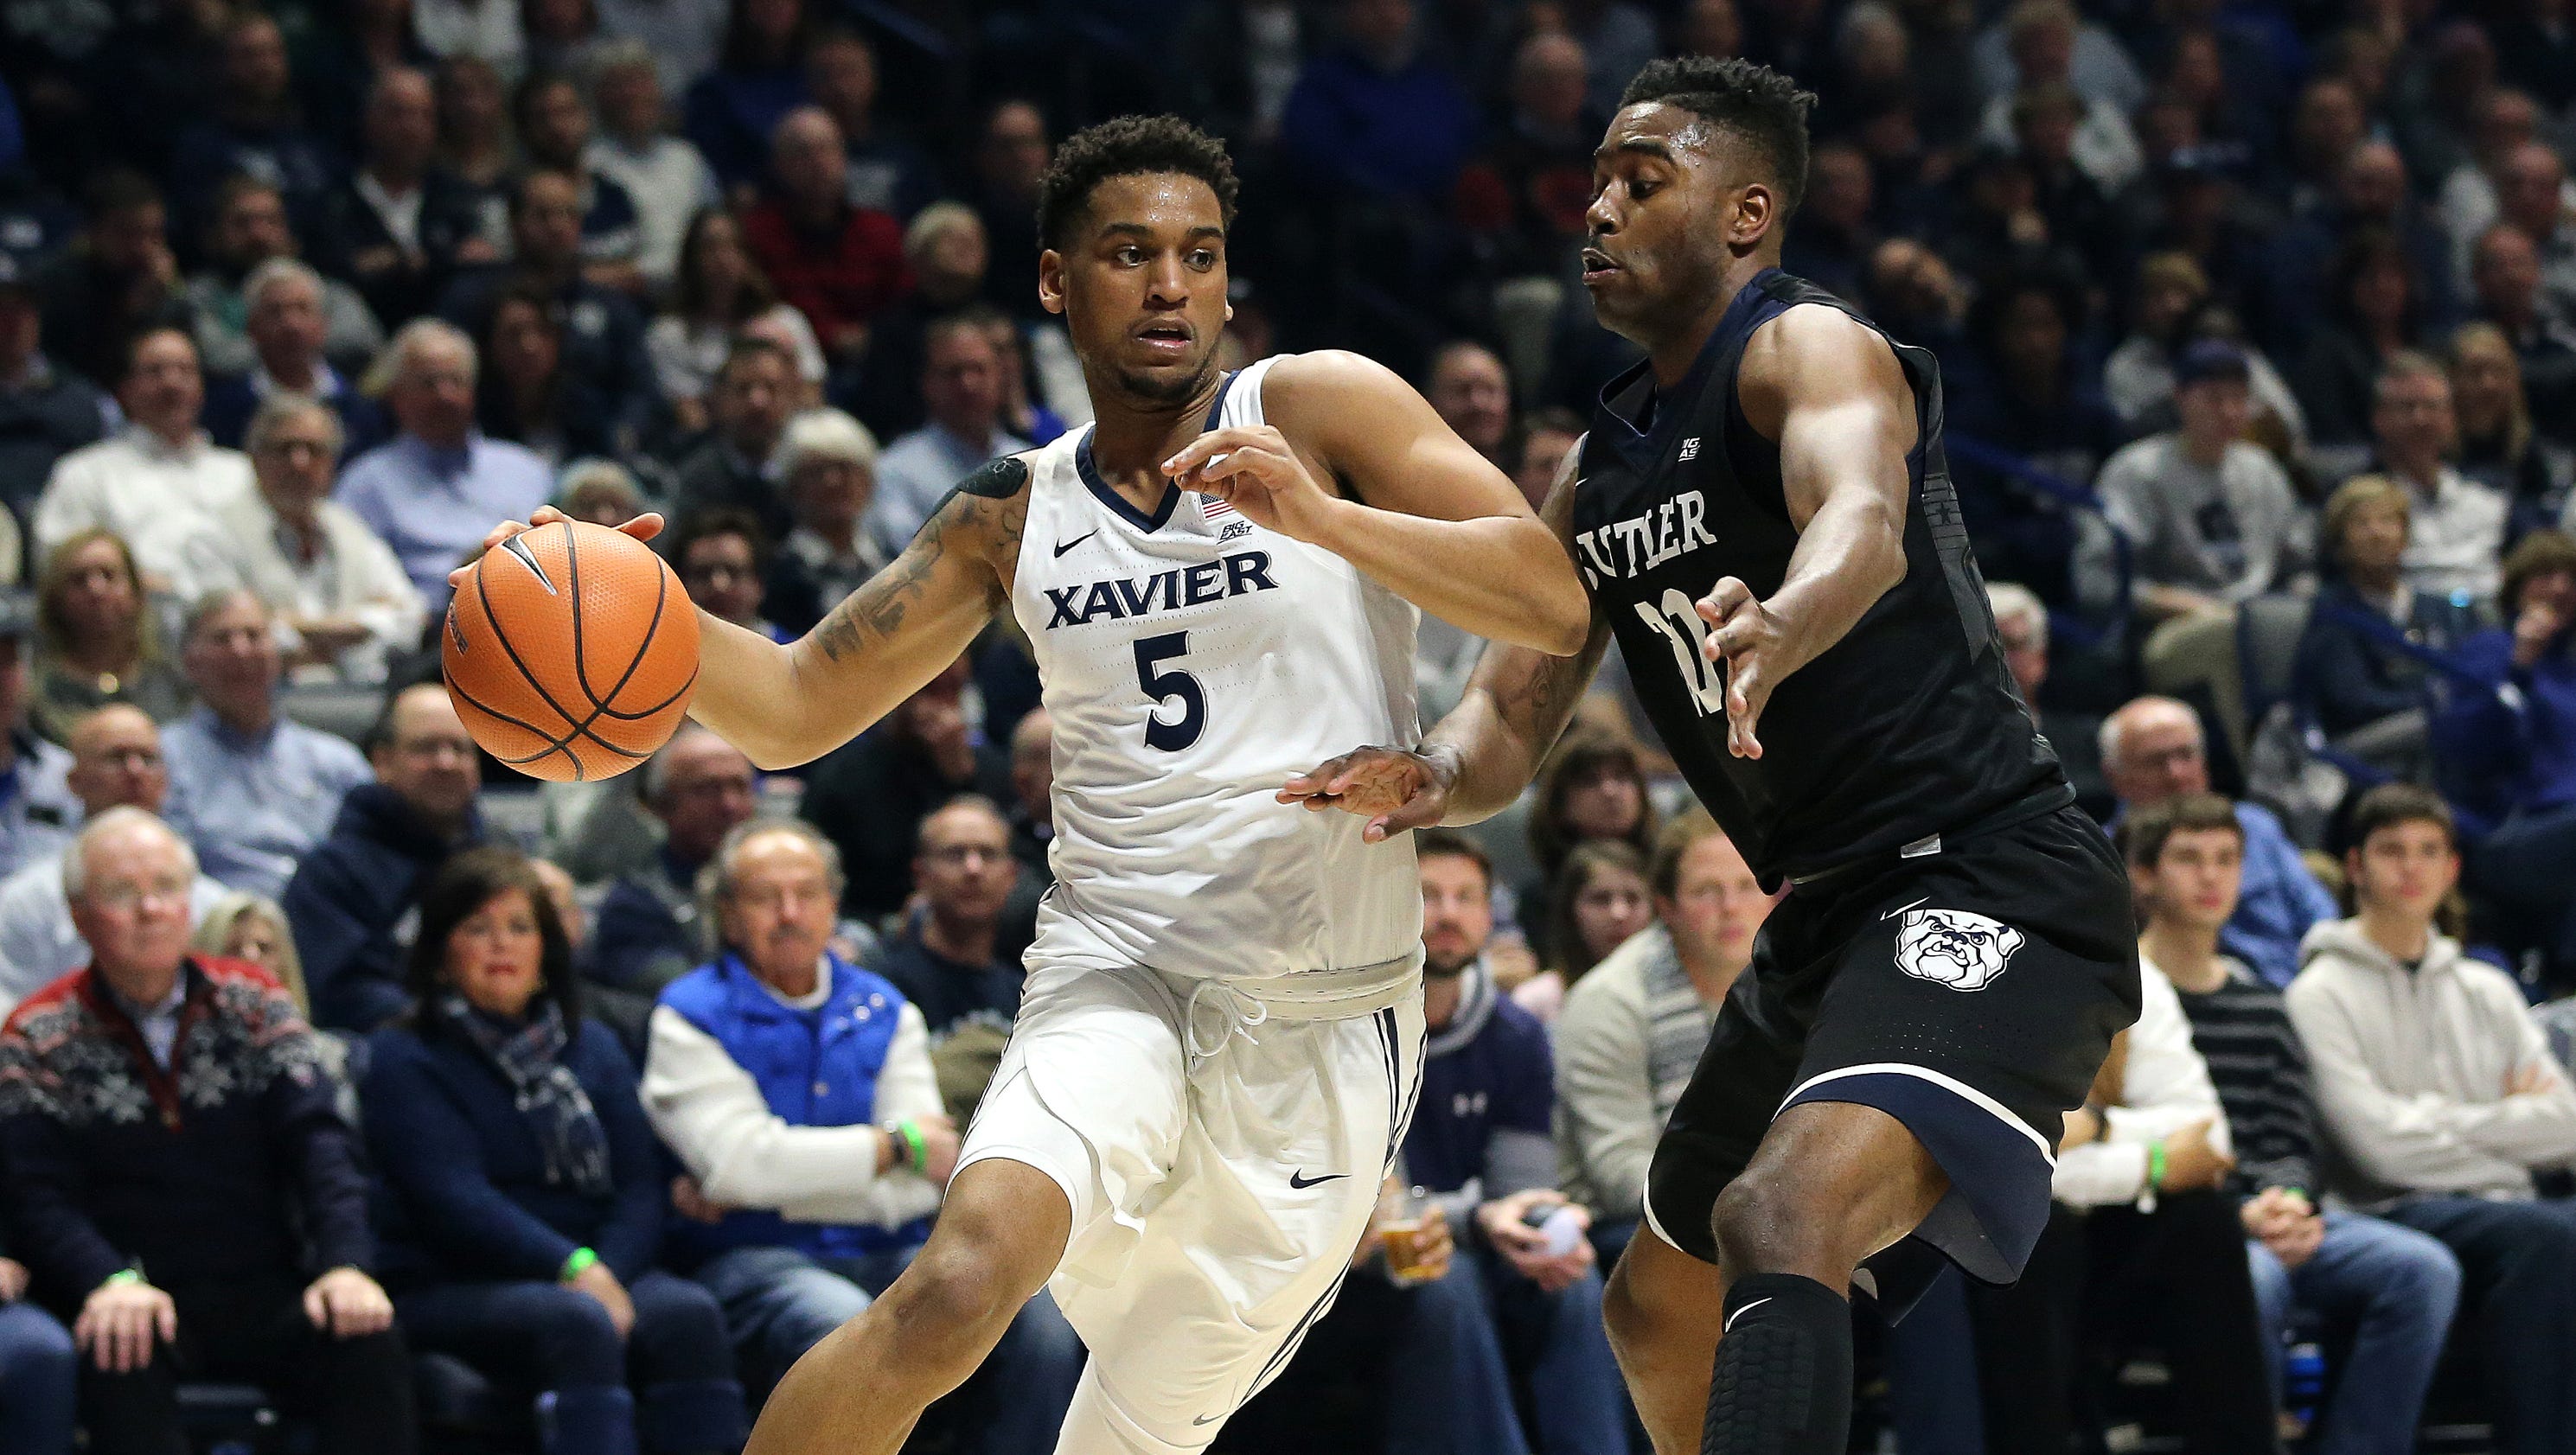 Analysis: Xavier outlasts Butler, wins 10th straight